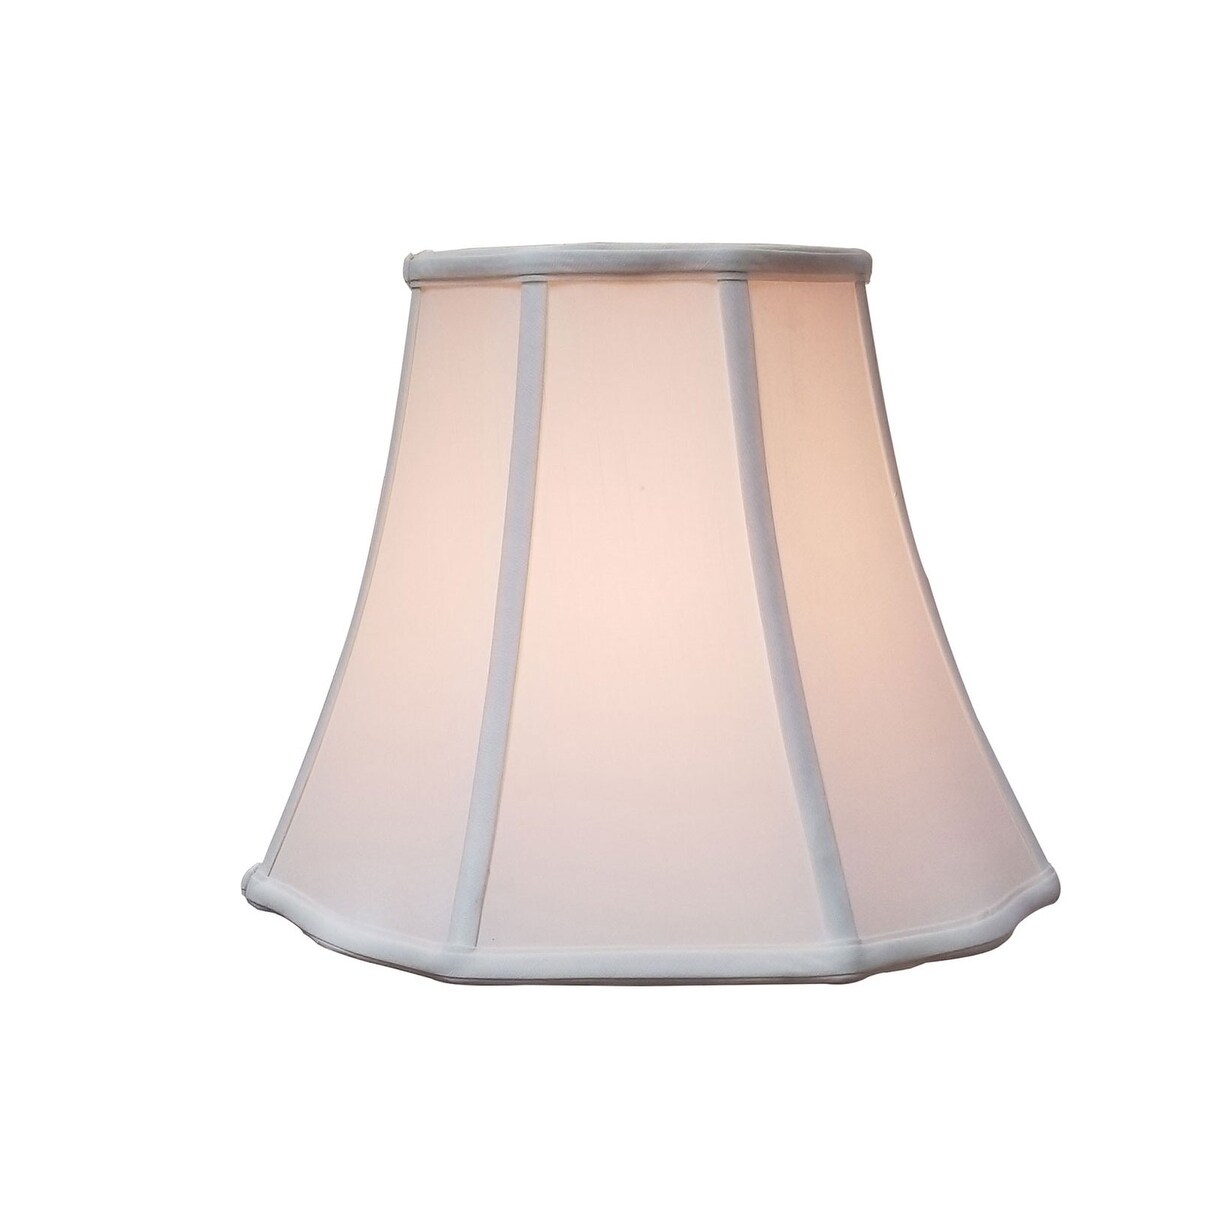 White Royal Designs BSO-701-18WH Flare Bottom Outside Corner Scallop Basic Lamp Shade 10 x 18 x 13 Set of 2